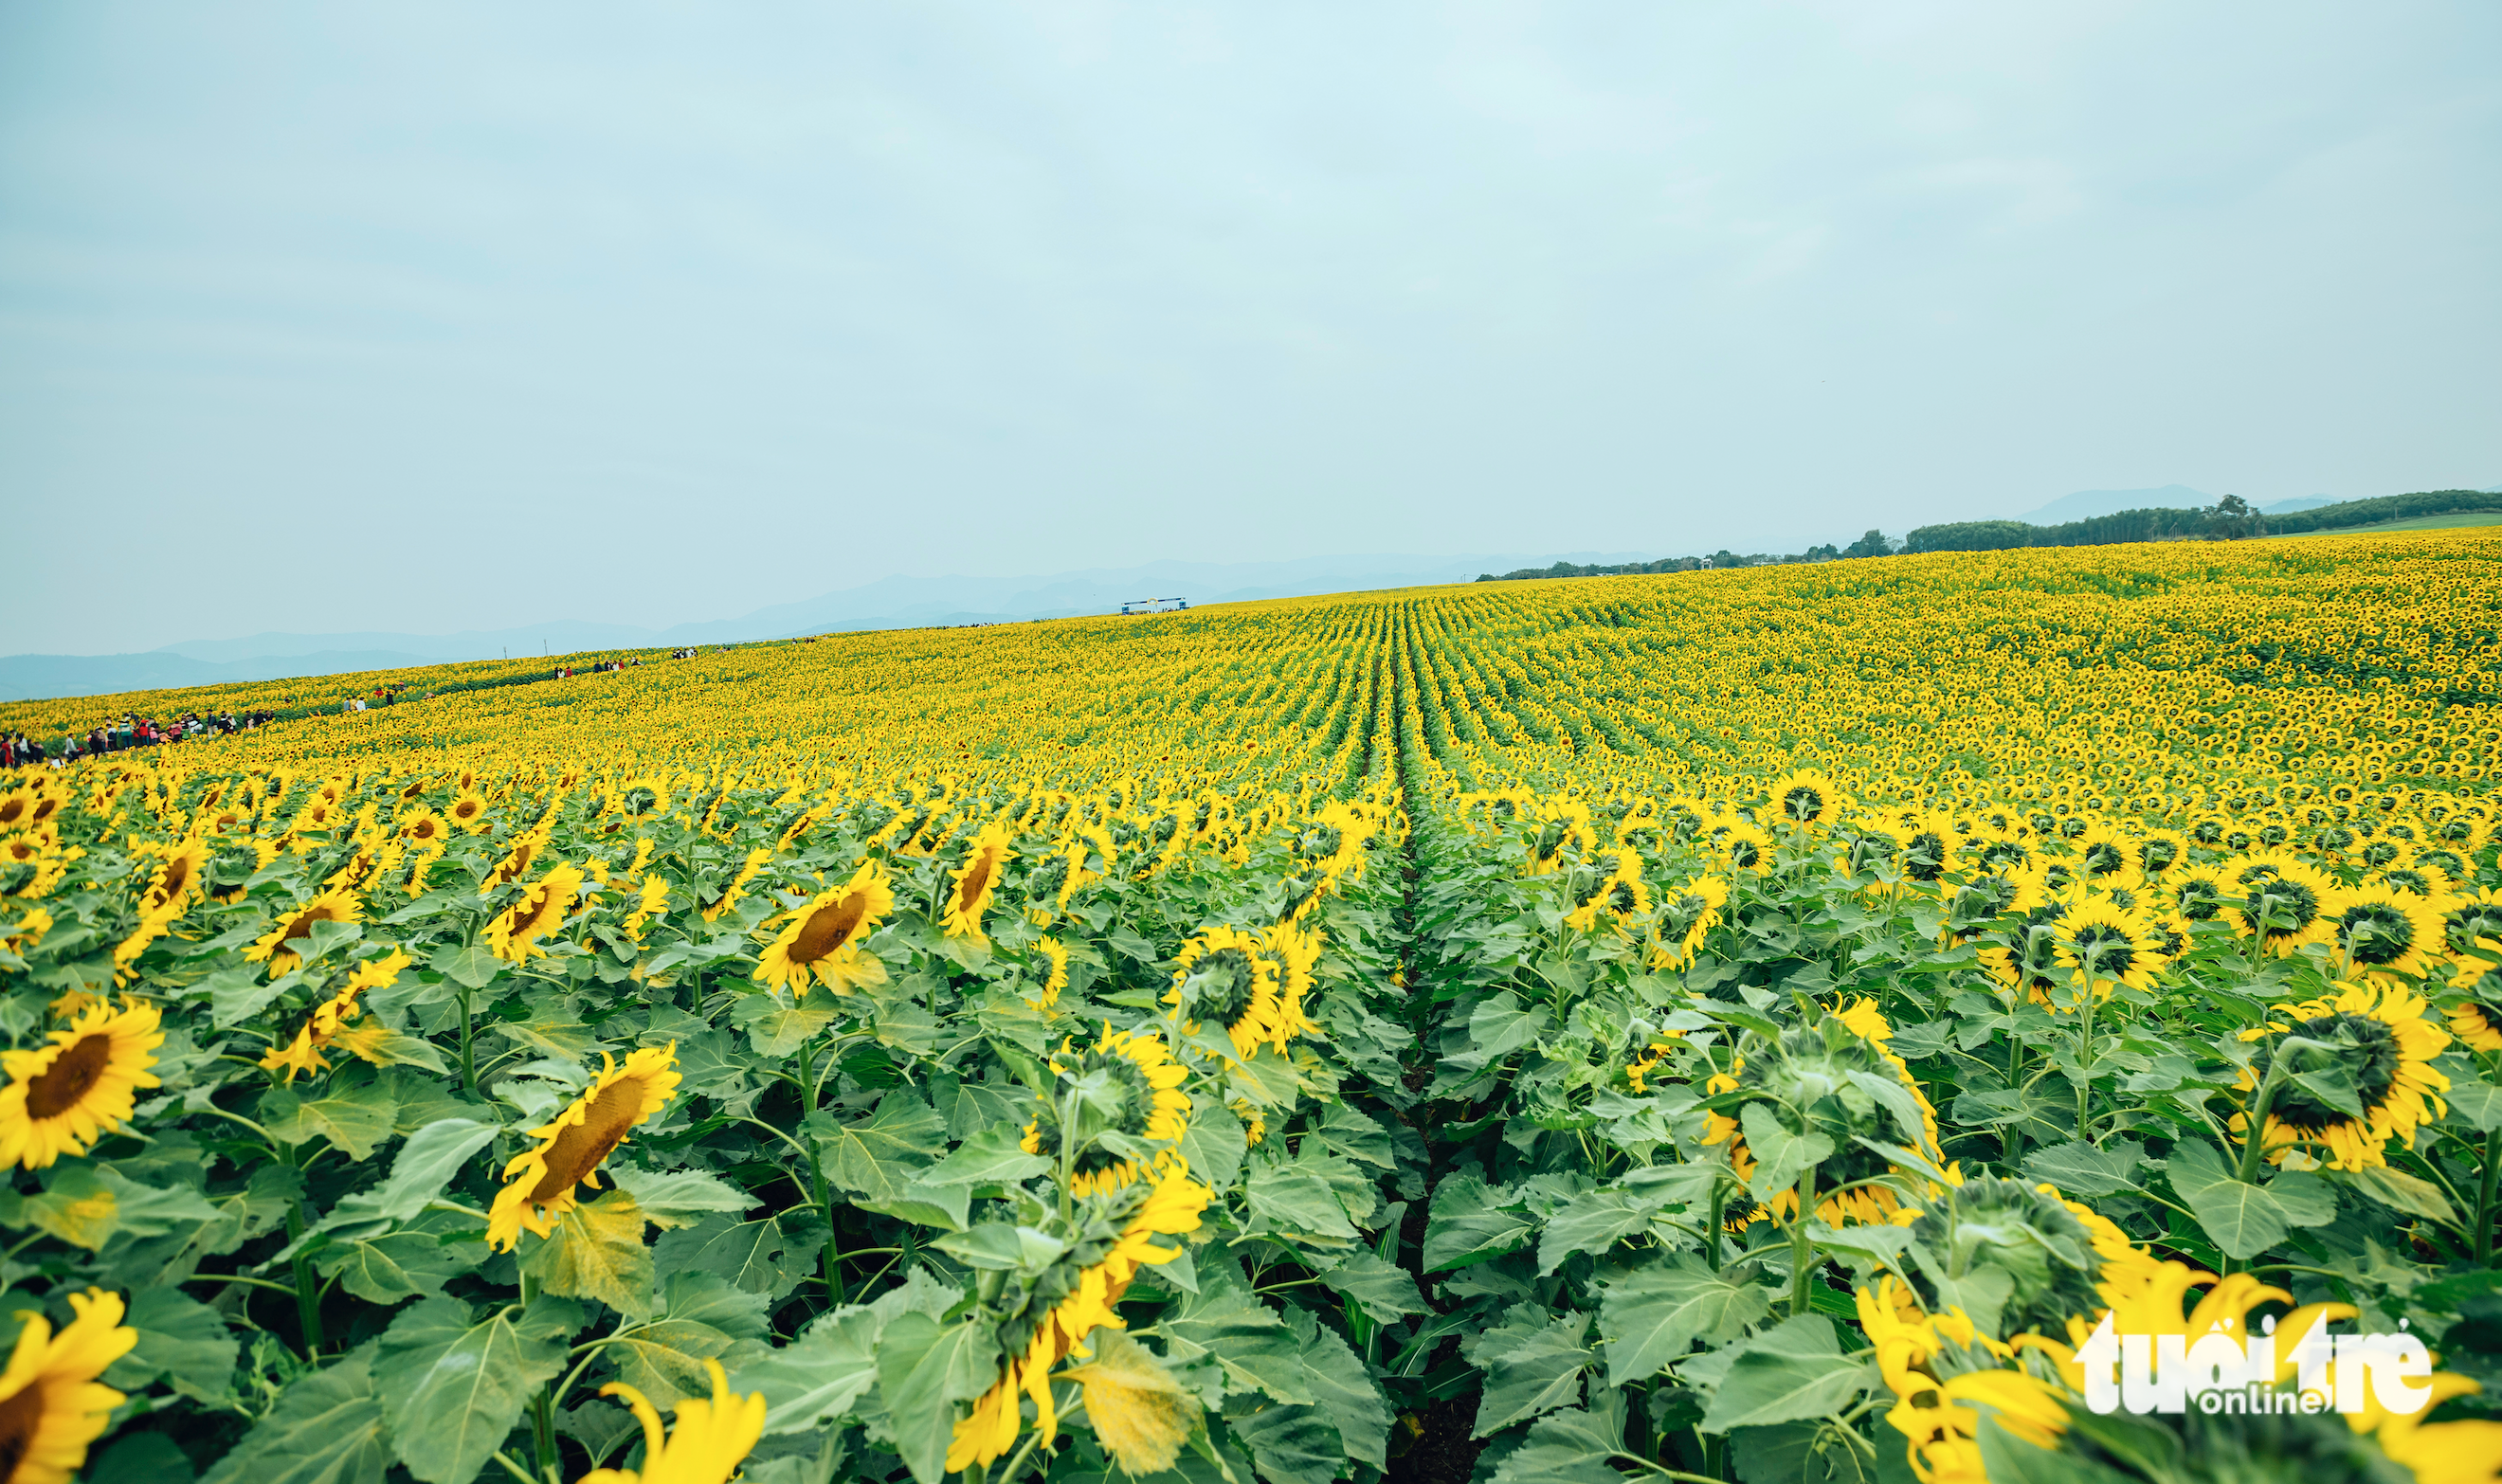 A blossoming sunflower field in Nghia Dan District, Nghe An Province, Vietnam. Photo: Rang Dong / Tuoi Tre